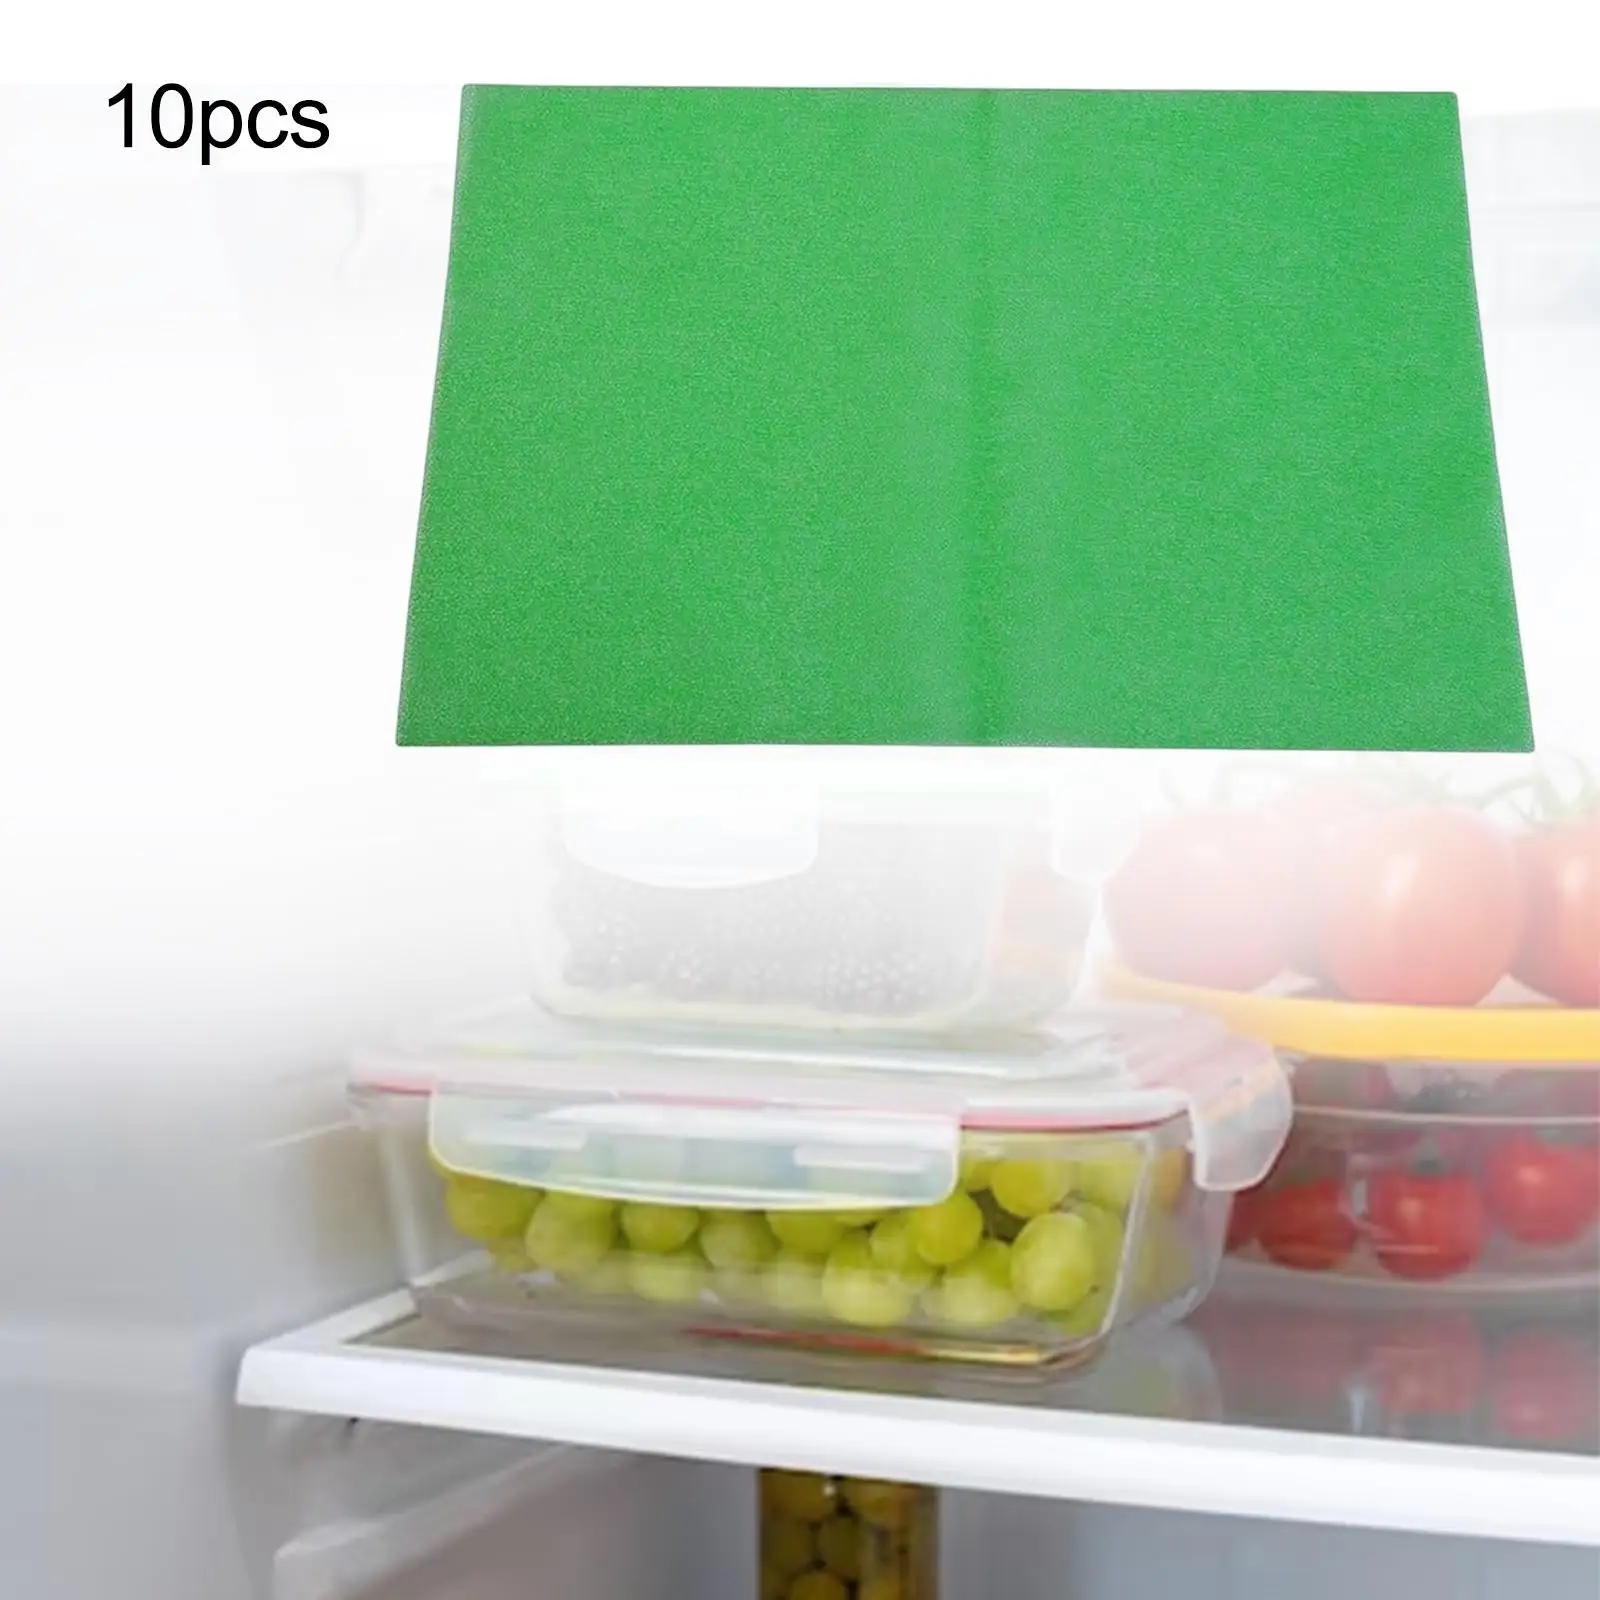 10x Multifunctional Refrigerator Liners Drawer Table Mats Fridge Pad Mat Kitchen Table Pad for Home Kitchen Closet Shelves Table